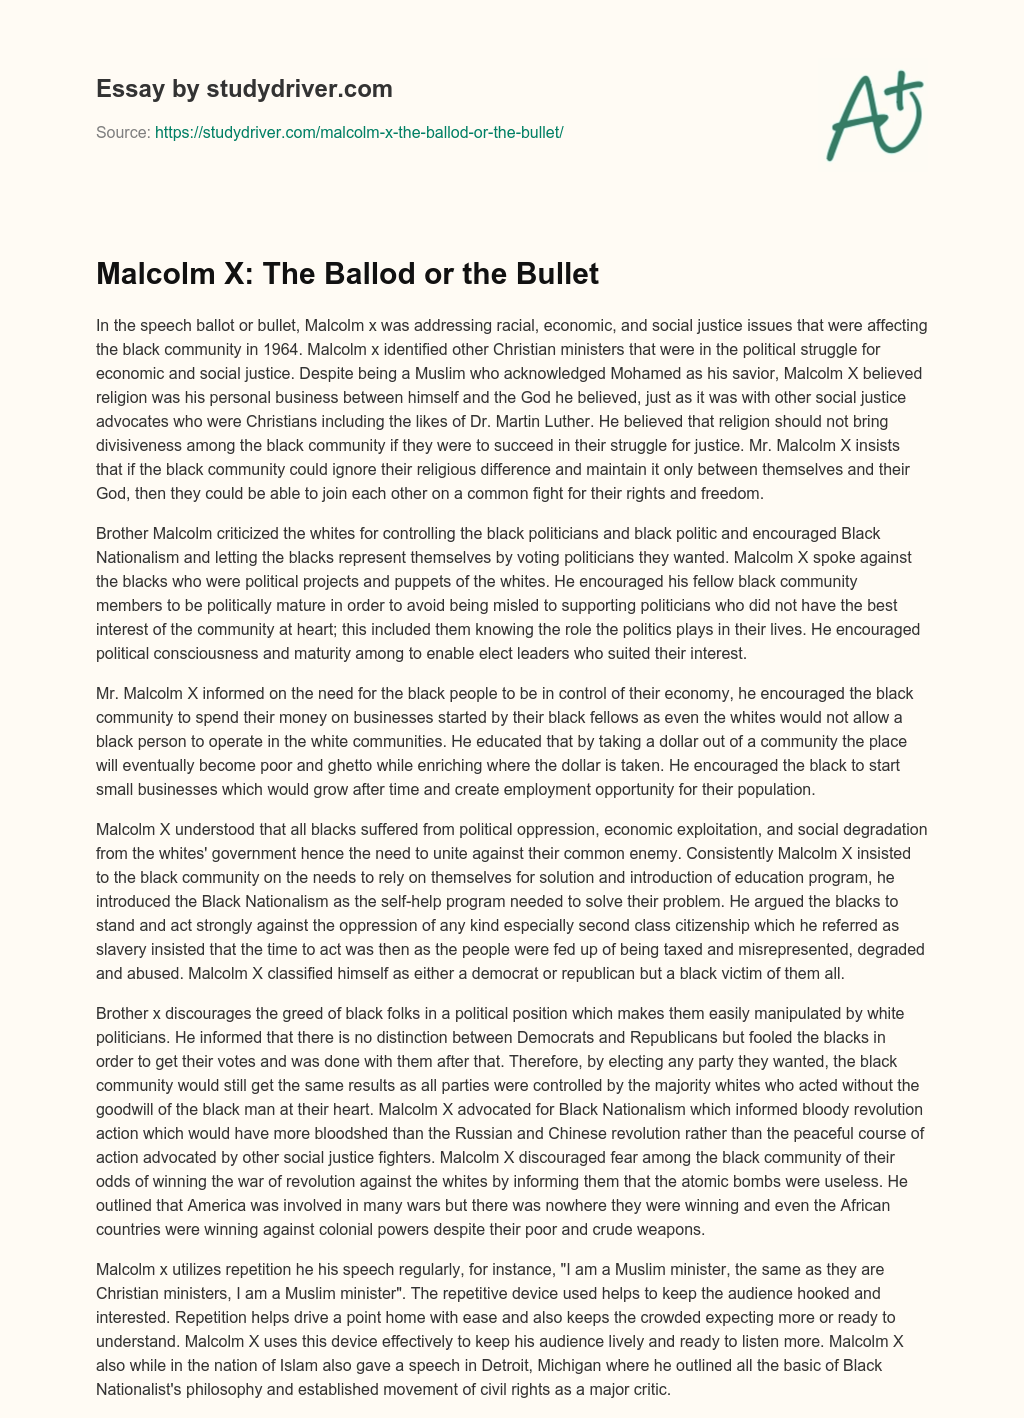 Malcolm X: the Ballod or the Bullet essay